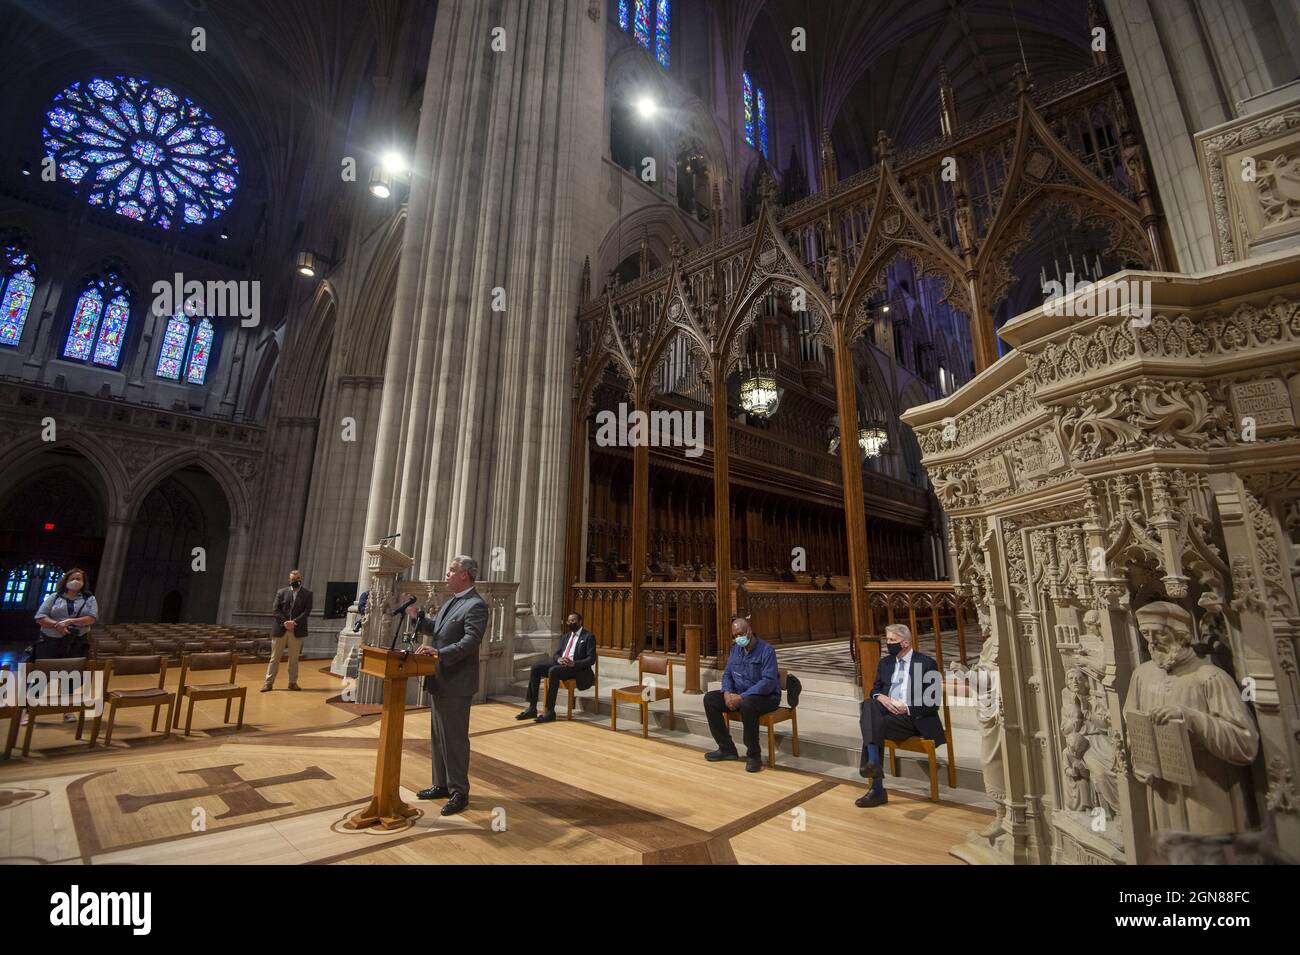 Washington, United States. 23rd Sep, 2021. Dean of the Washington National Cathedral Randy Hollerith announces the cathedral has commissioned American artist Kerry James Marshall and poet Elizabeth Alexander to create new racial justice themed stained glass windows and inscriptions for the cathedral's southern wall on Thursday, September 23, 2021. The new windows will replace ones removed in 2017 featuring Confederate generals Robert E. Lee and Thomas 'Stonewall' Jackson. Photo by Bonnie Cash/UPI Credit: UPI/Alamy Live News Stock Photo